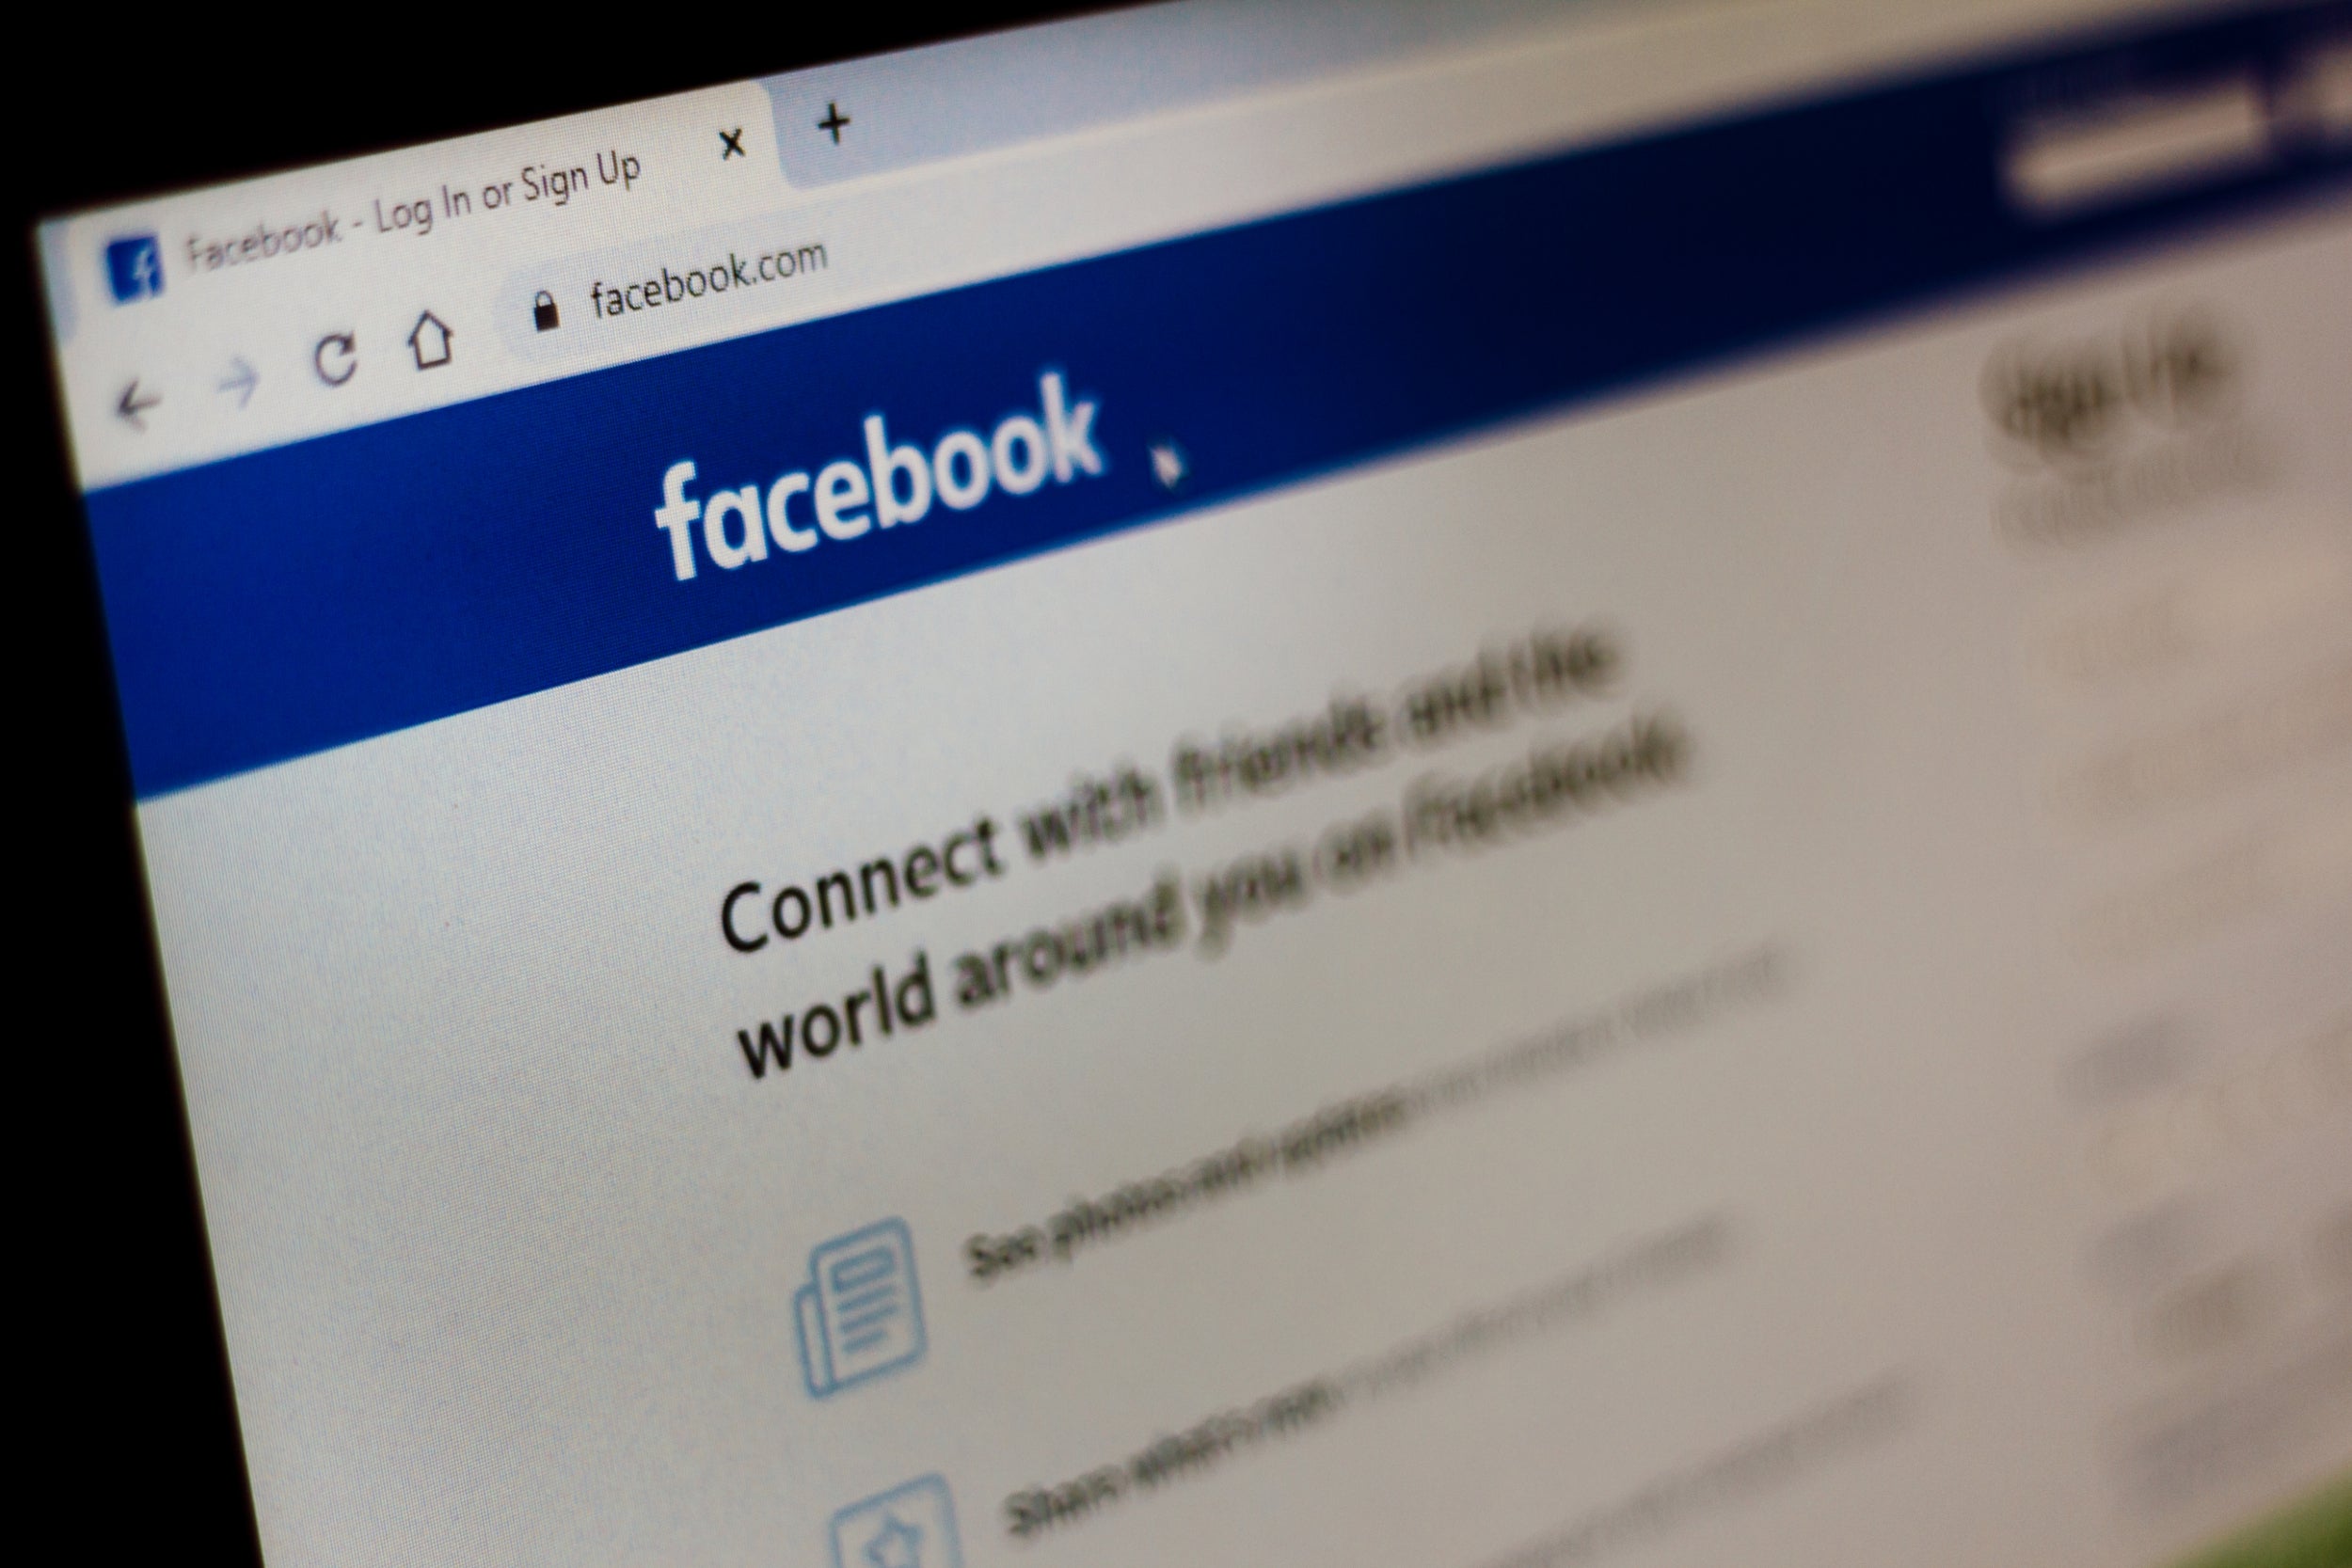 Facebook said: 'While we do not take down content simply for being untruthful, many posts that deny the Holocaust often violate our policies against hate speech and are removed'